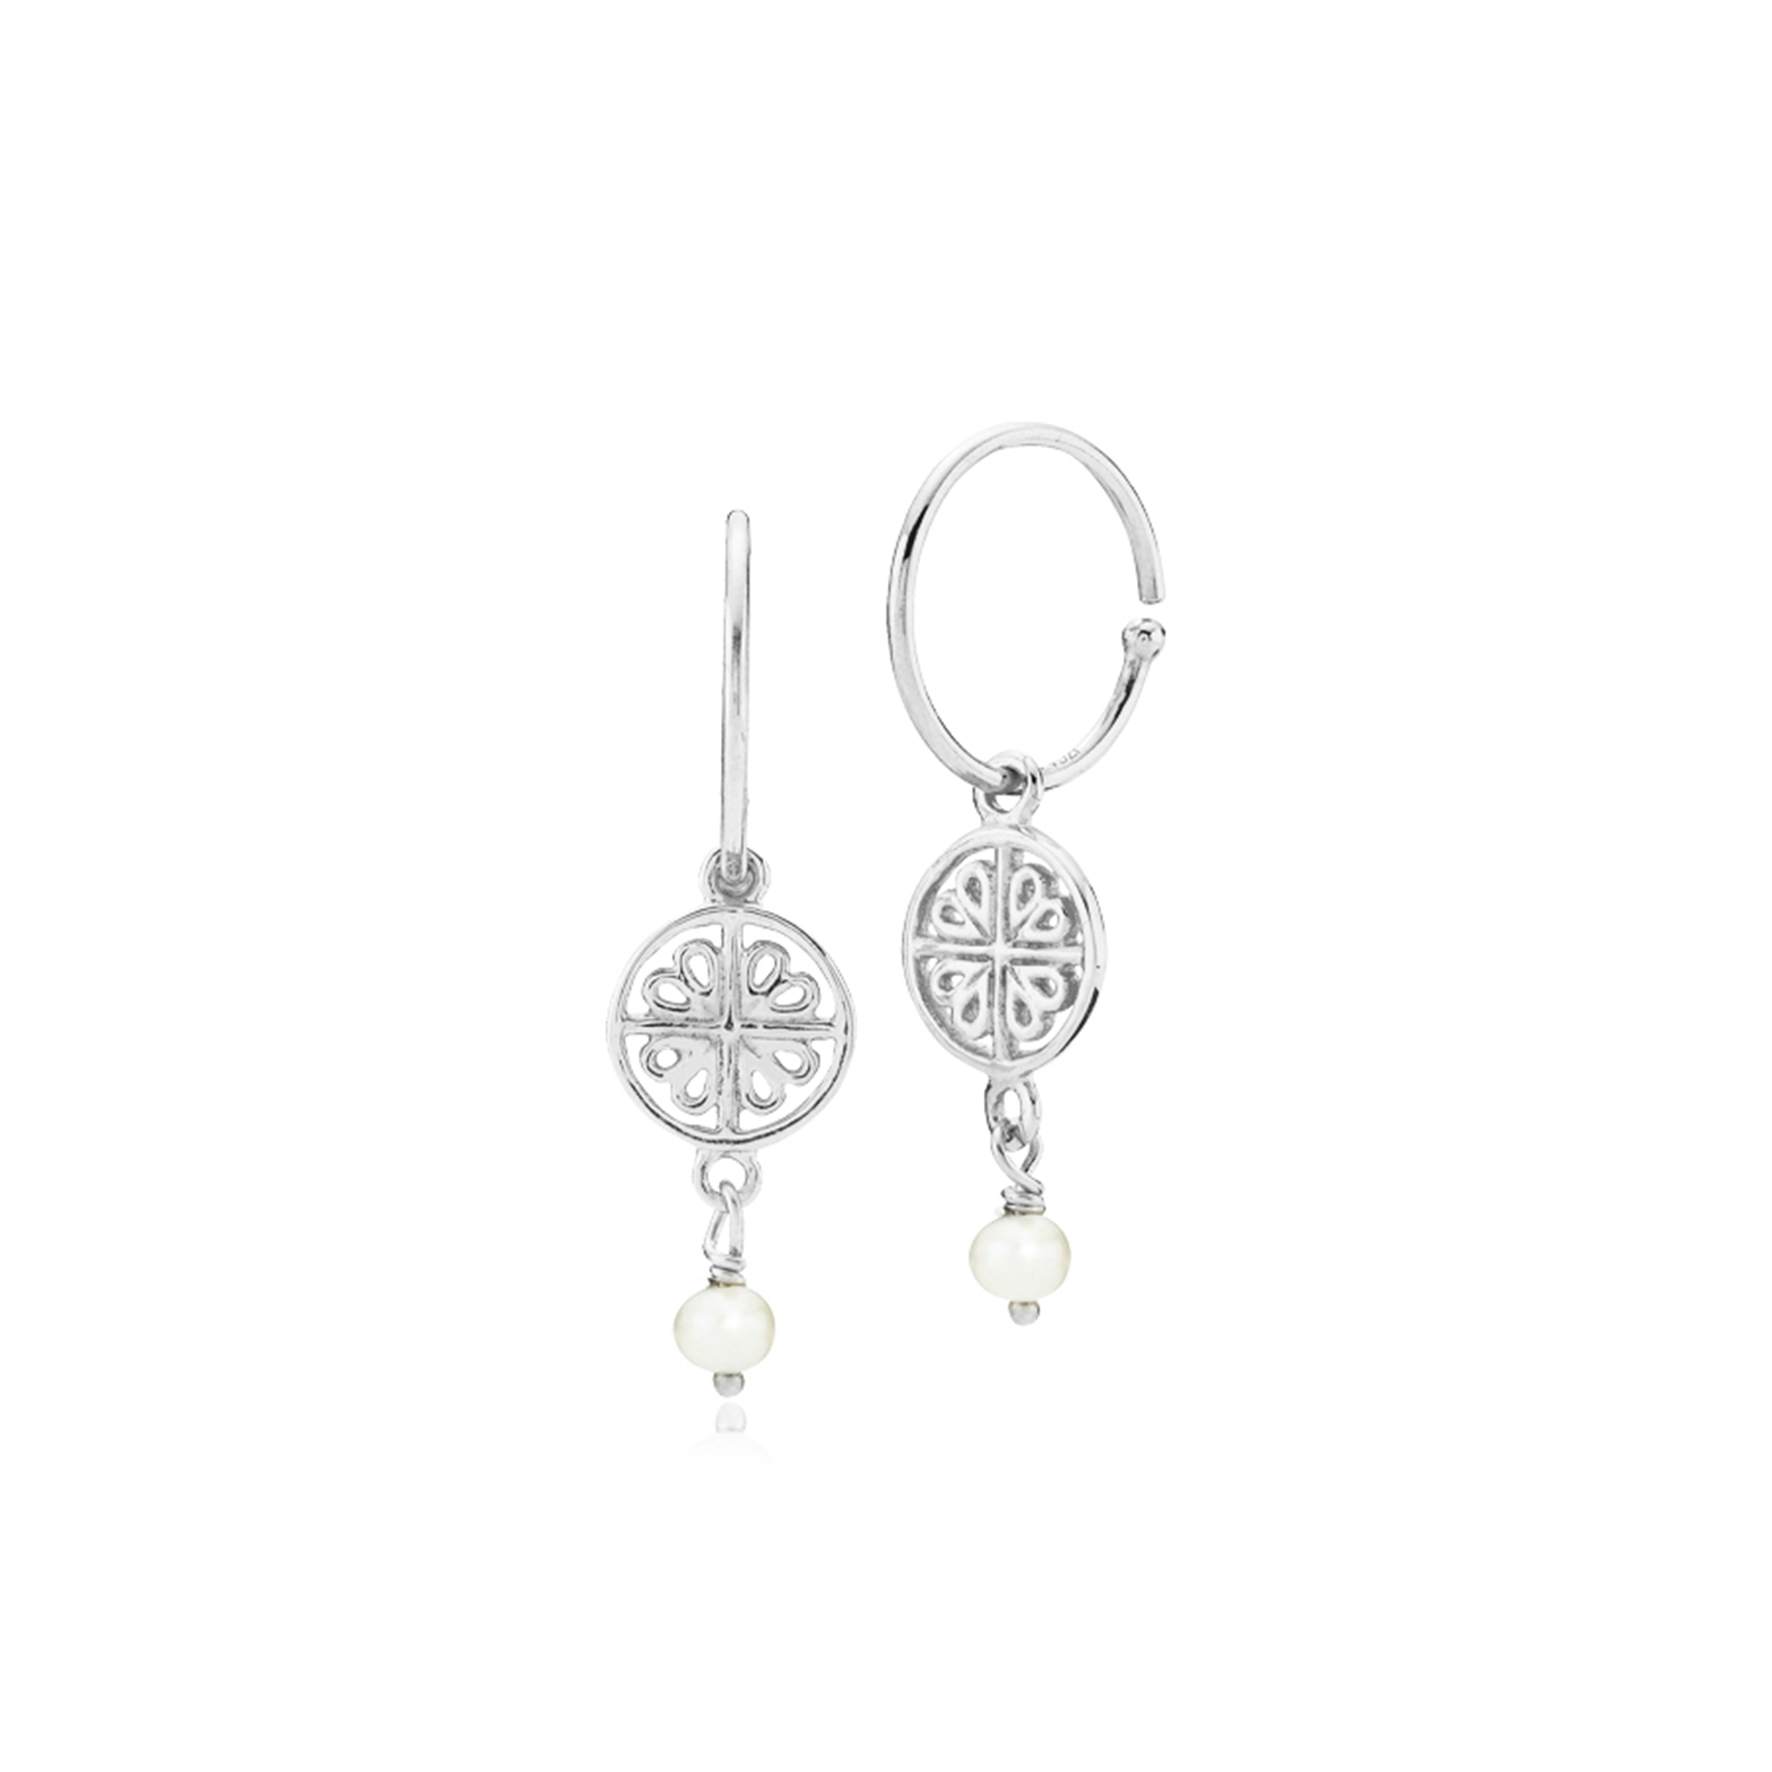 Balance Creol Earrings With Pearl from Sistie in Silver Sterling 925